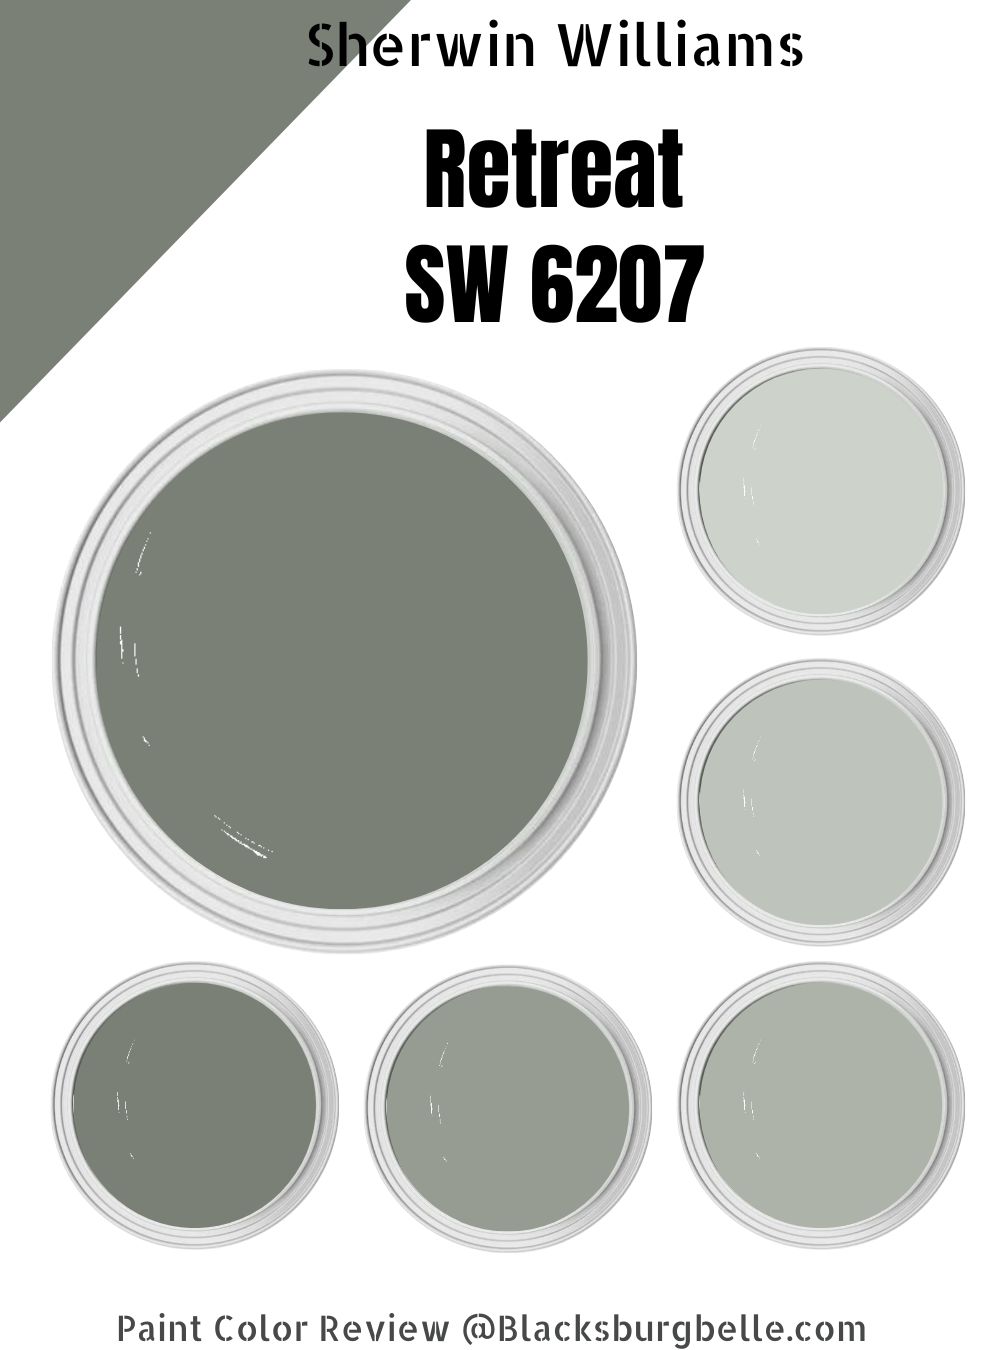 Sherwin-Williams Retreat (SW 6207) Paint Color Review